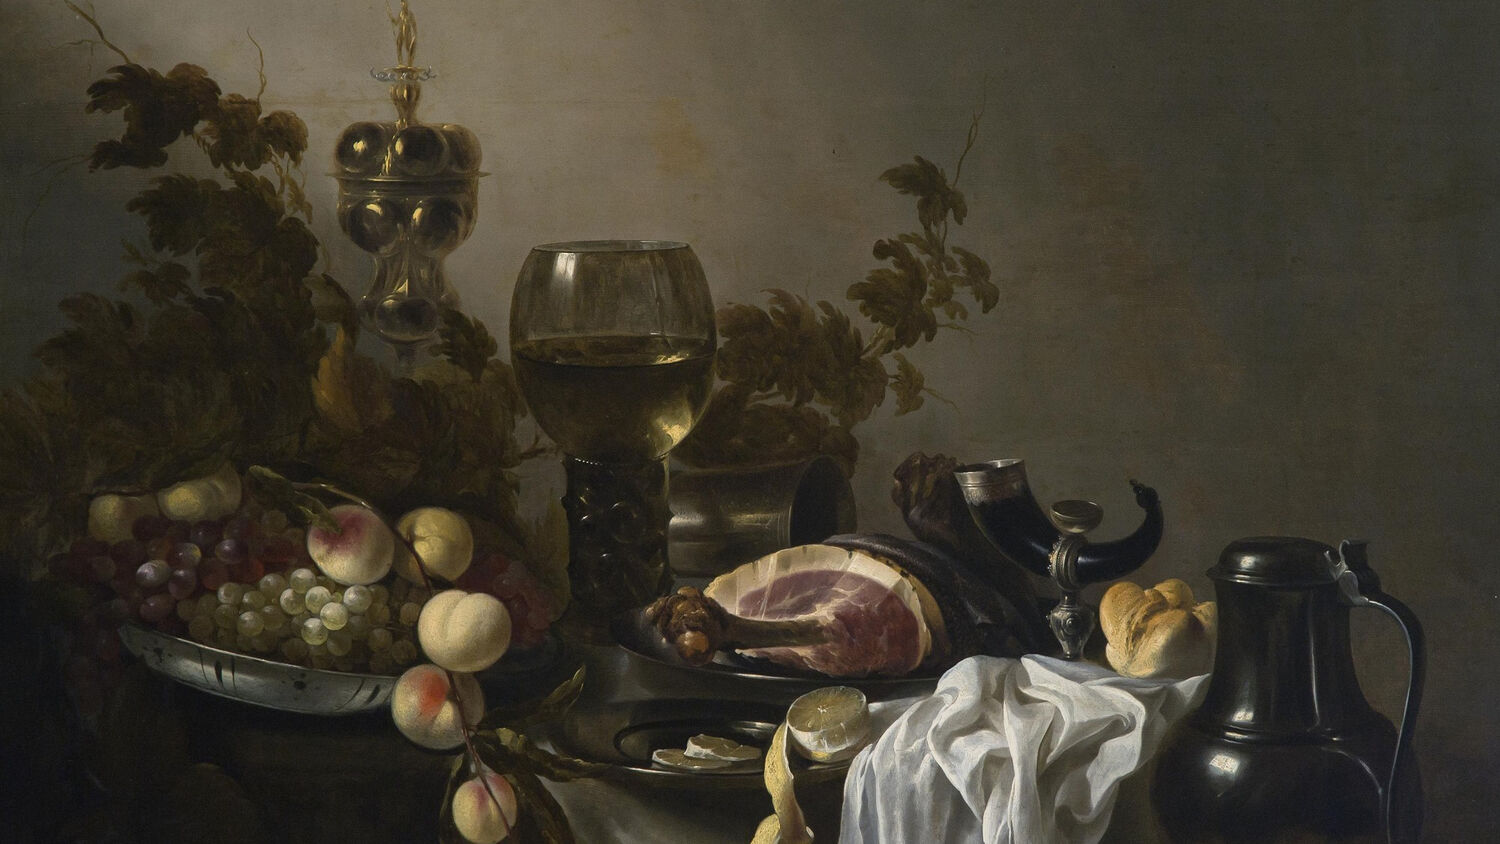 A close-up view of an oil painting of a still life, featuring peaches, grapes and a ham bone arranged on a table with a white cloth. There are several drinking vessels on the table too, as well as some leafy branches in the background. The blue Naked Wines logo can be seen in the bottom left corner.